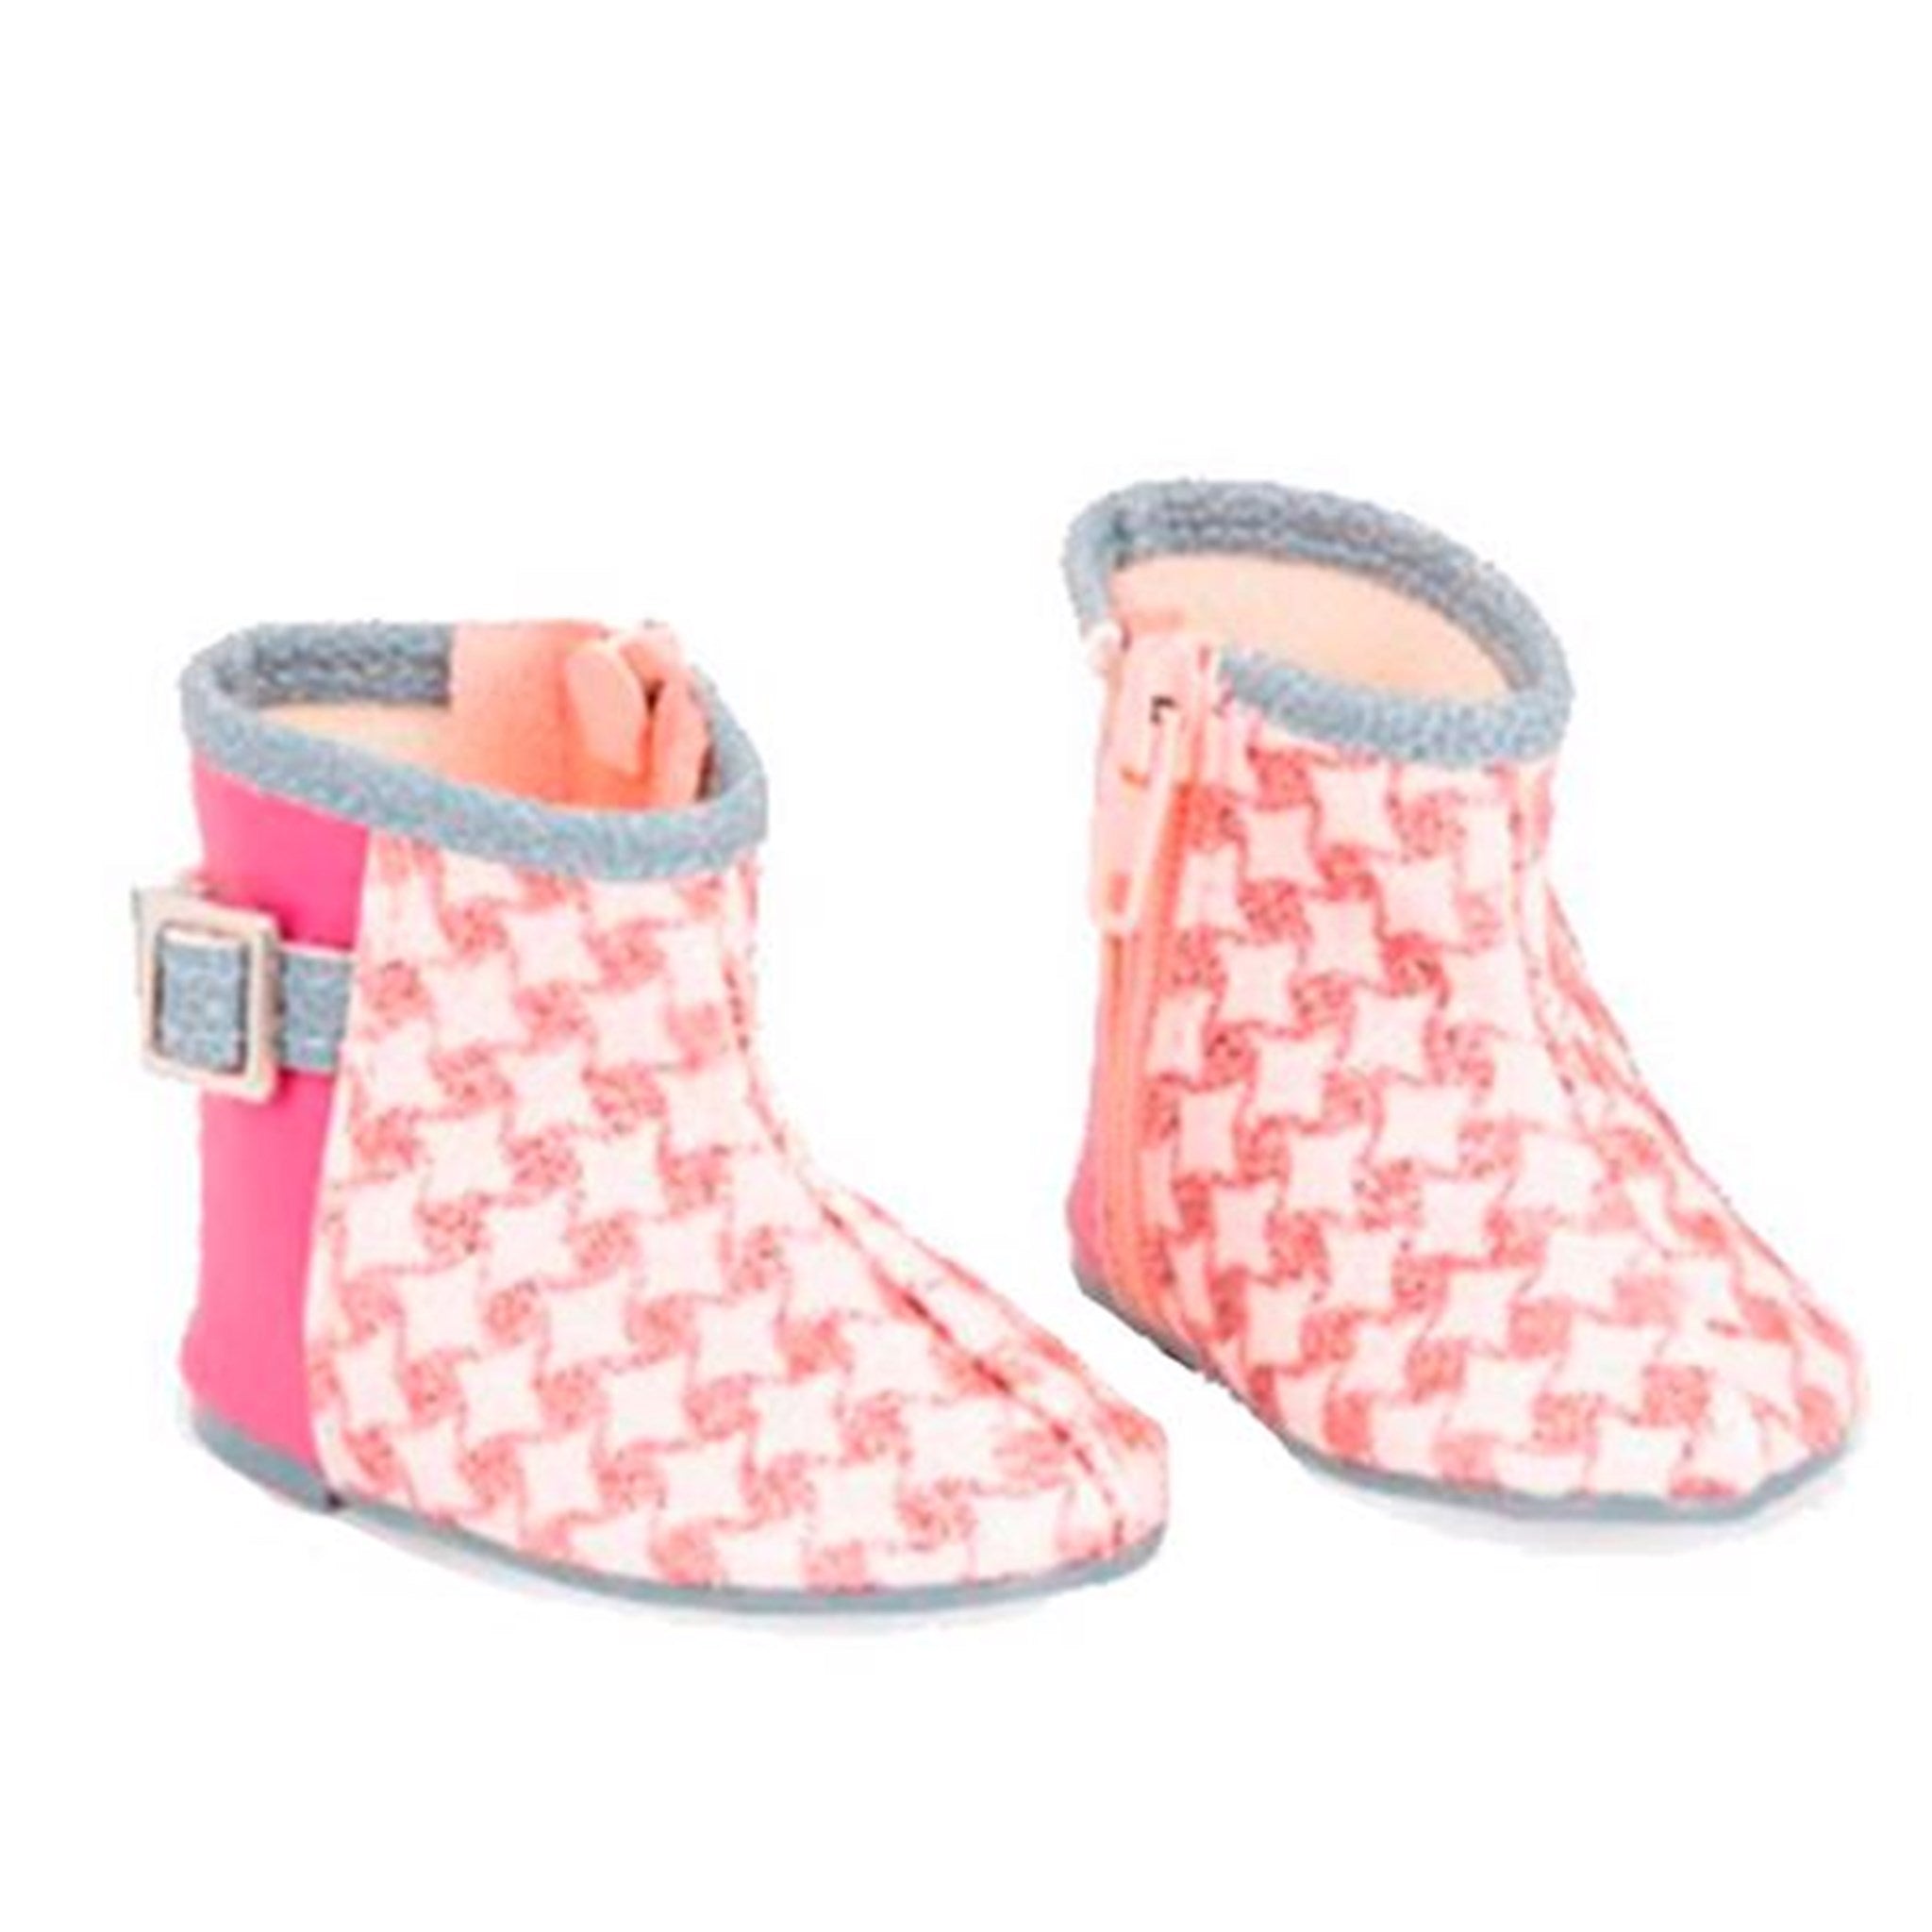 Our Generation Doll Shoes - Checked Boots Pink